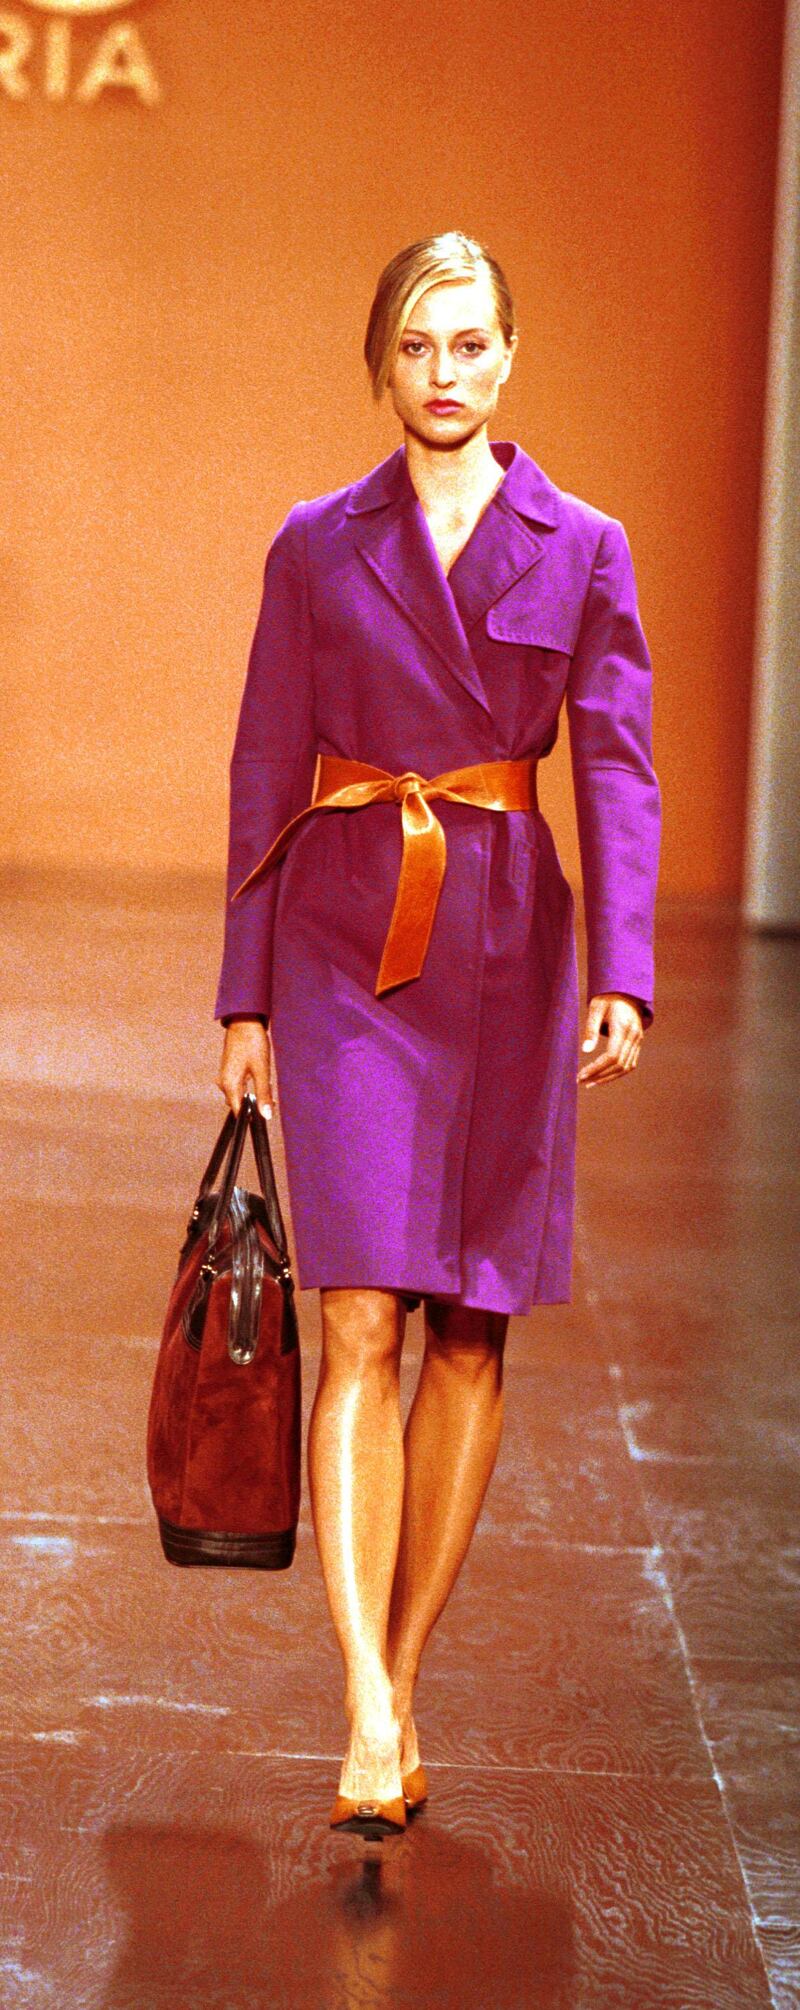 378611 04: A model displays the latest collection in women's fashion September 18, 2000 at the BCBG Max Azria Spring 2001 fashion show during the "7th on Sixth" fashion week in New York City. (Photo by George DeSota/Liaison/Getty Images)